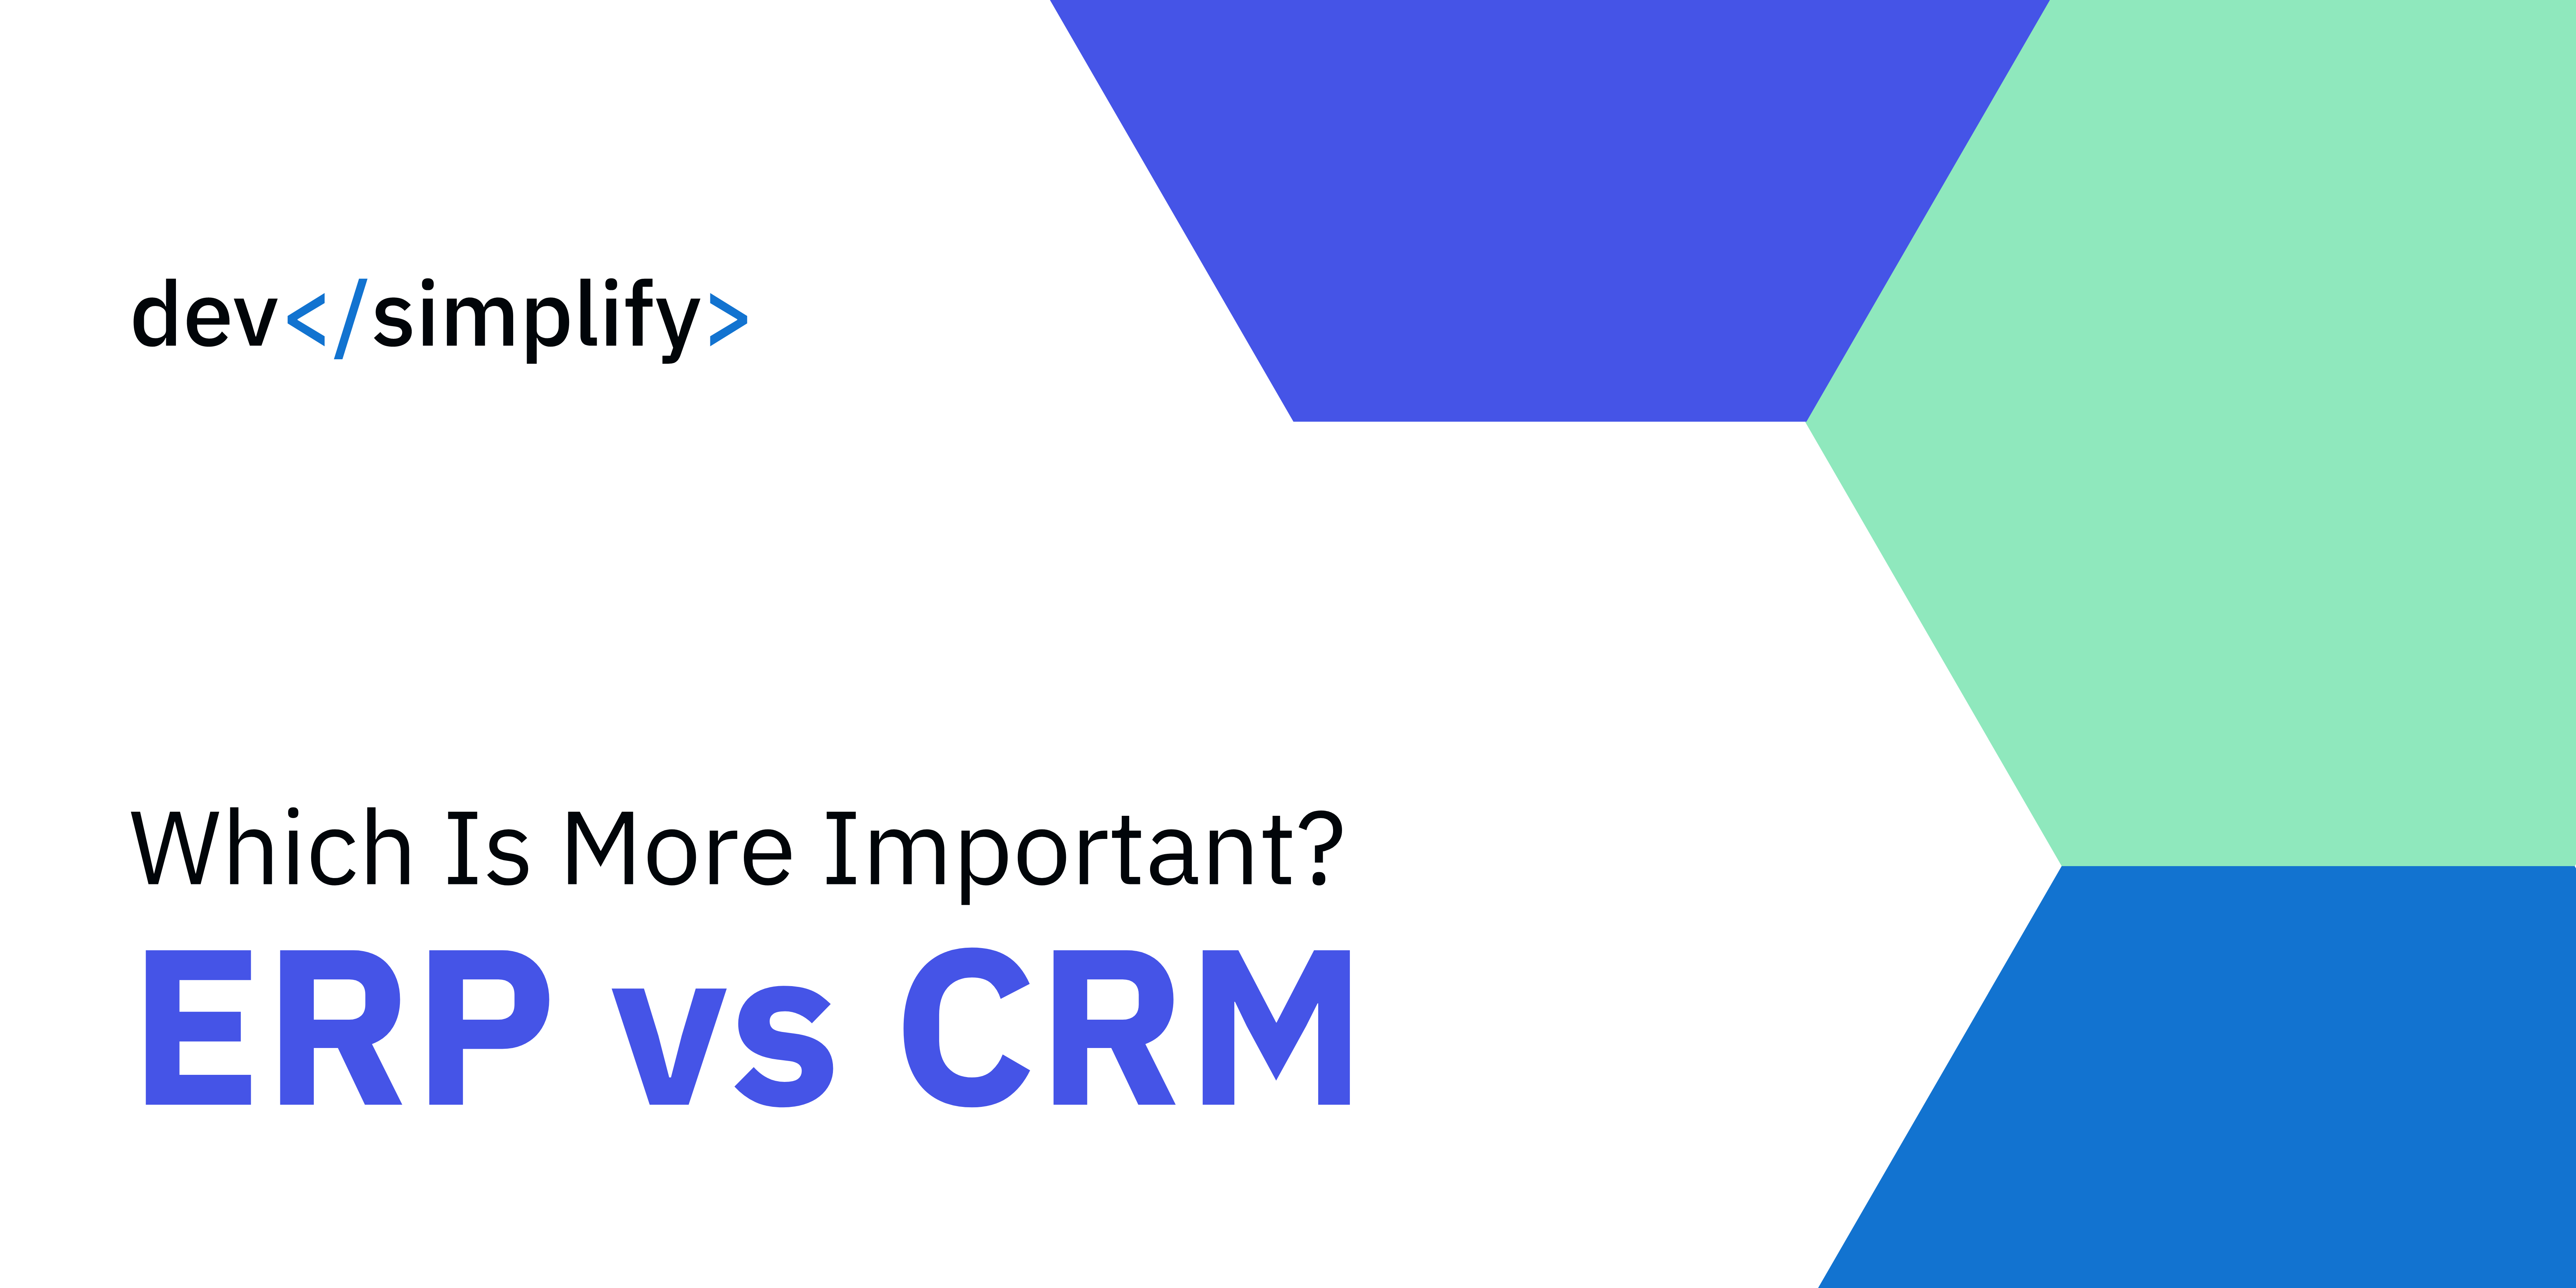 erp vs crm - which is more important?